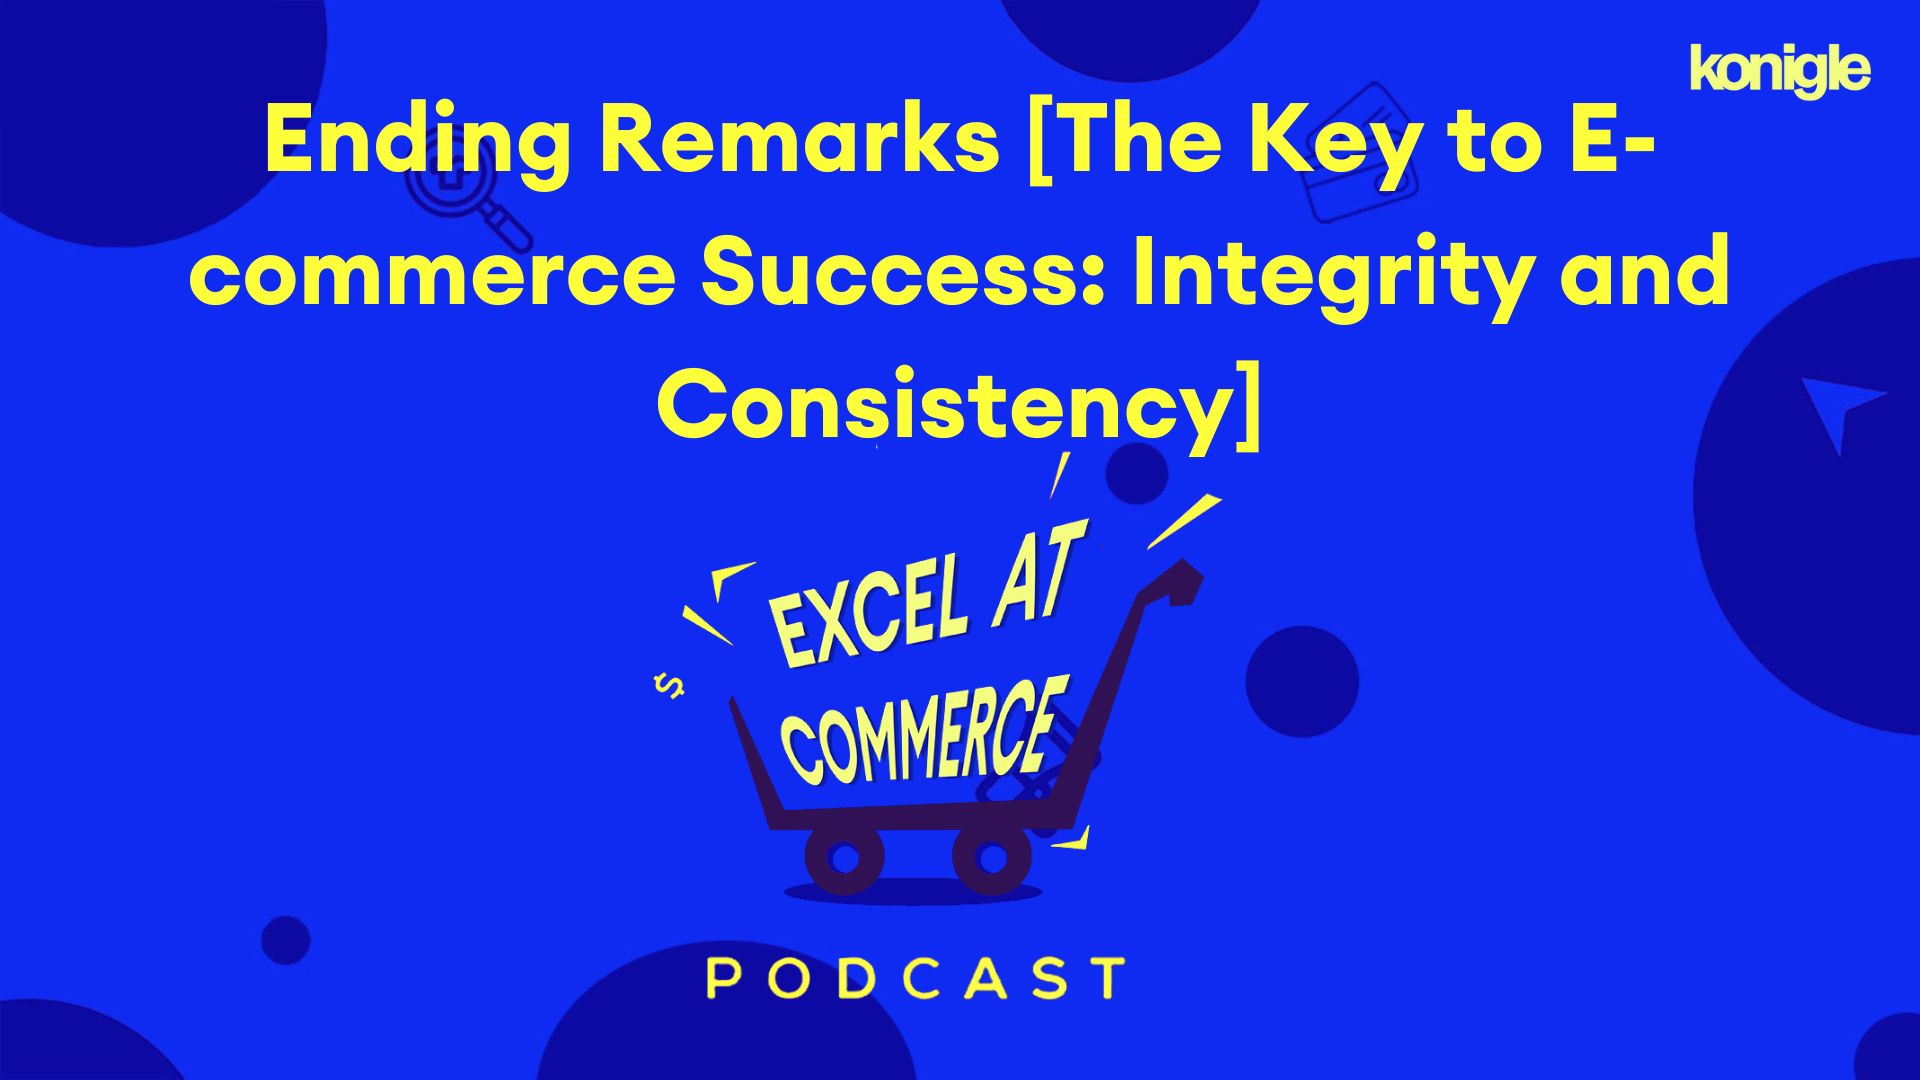 Ending Remarks [The Key to E-commerce Success: Integrity and Consistency]